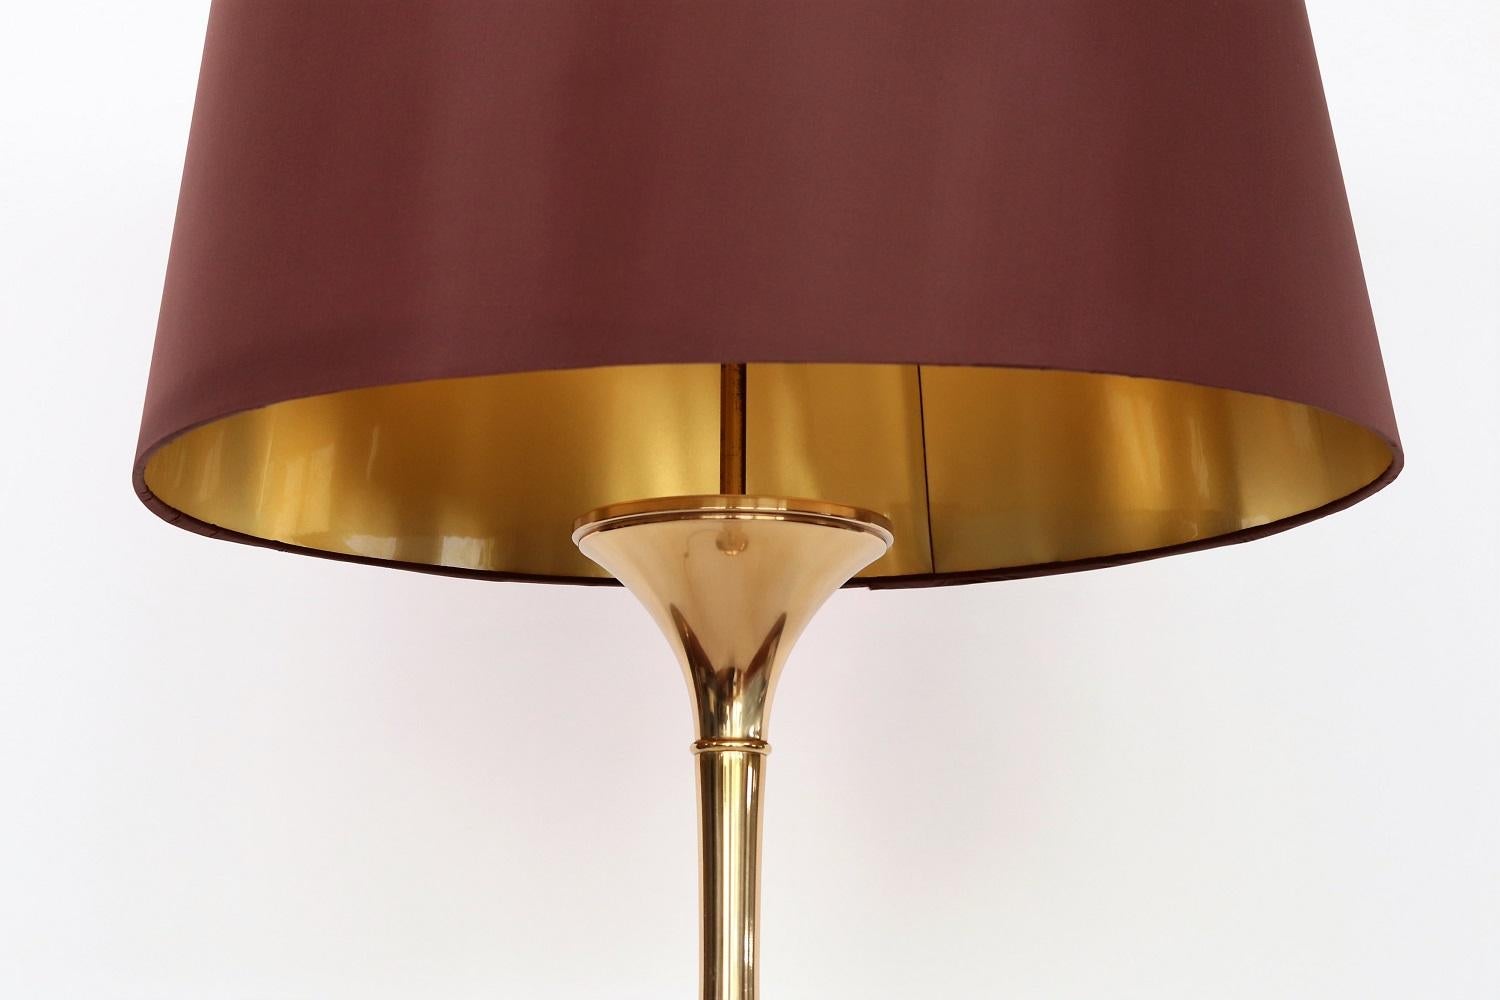 Amazing floor lamp in bamboo optic made in shiny brass with beautiful patina.
Designed from Ingo Maurer, manufactured from MDesign in the 1960s.
The lamp is equipped with original lamp-shade, which have been remade in original chocolate brown